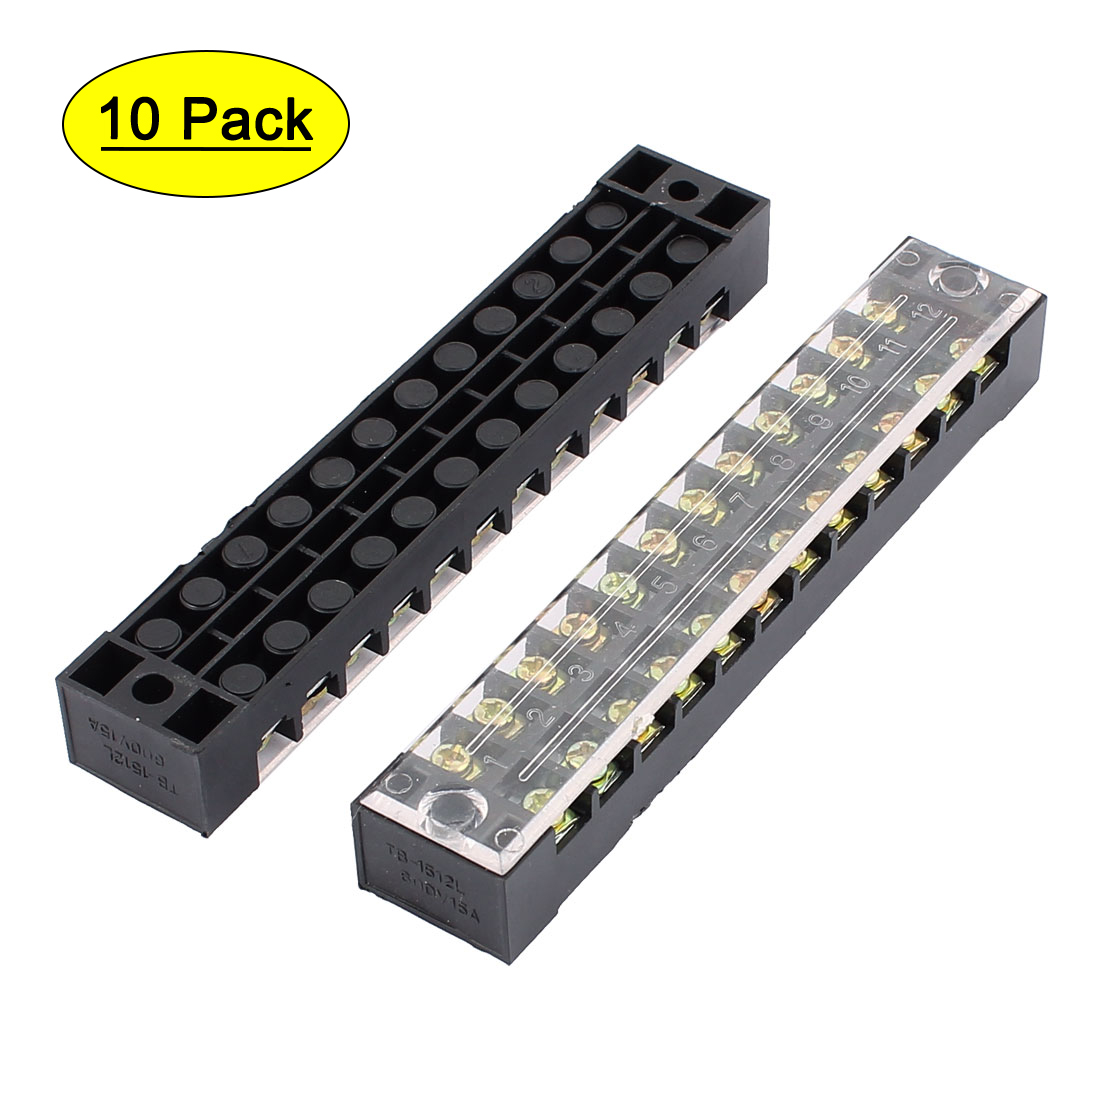 10 Pcs 600V 15A 12P Screw Electrical Barrier Terminal Block Cable Connector Bar - image 1 of 5